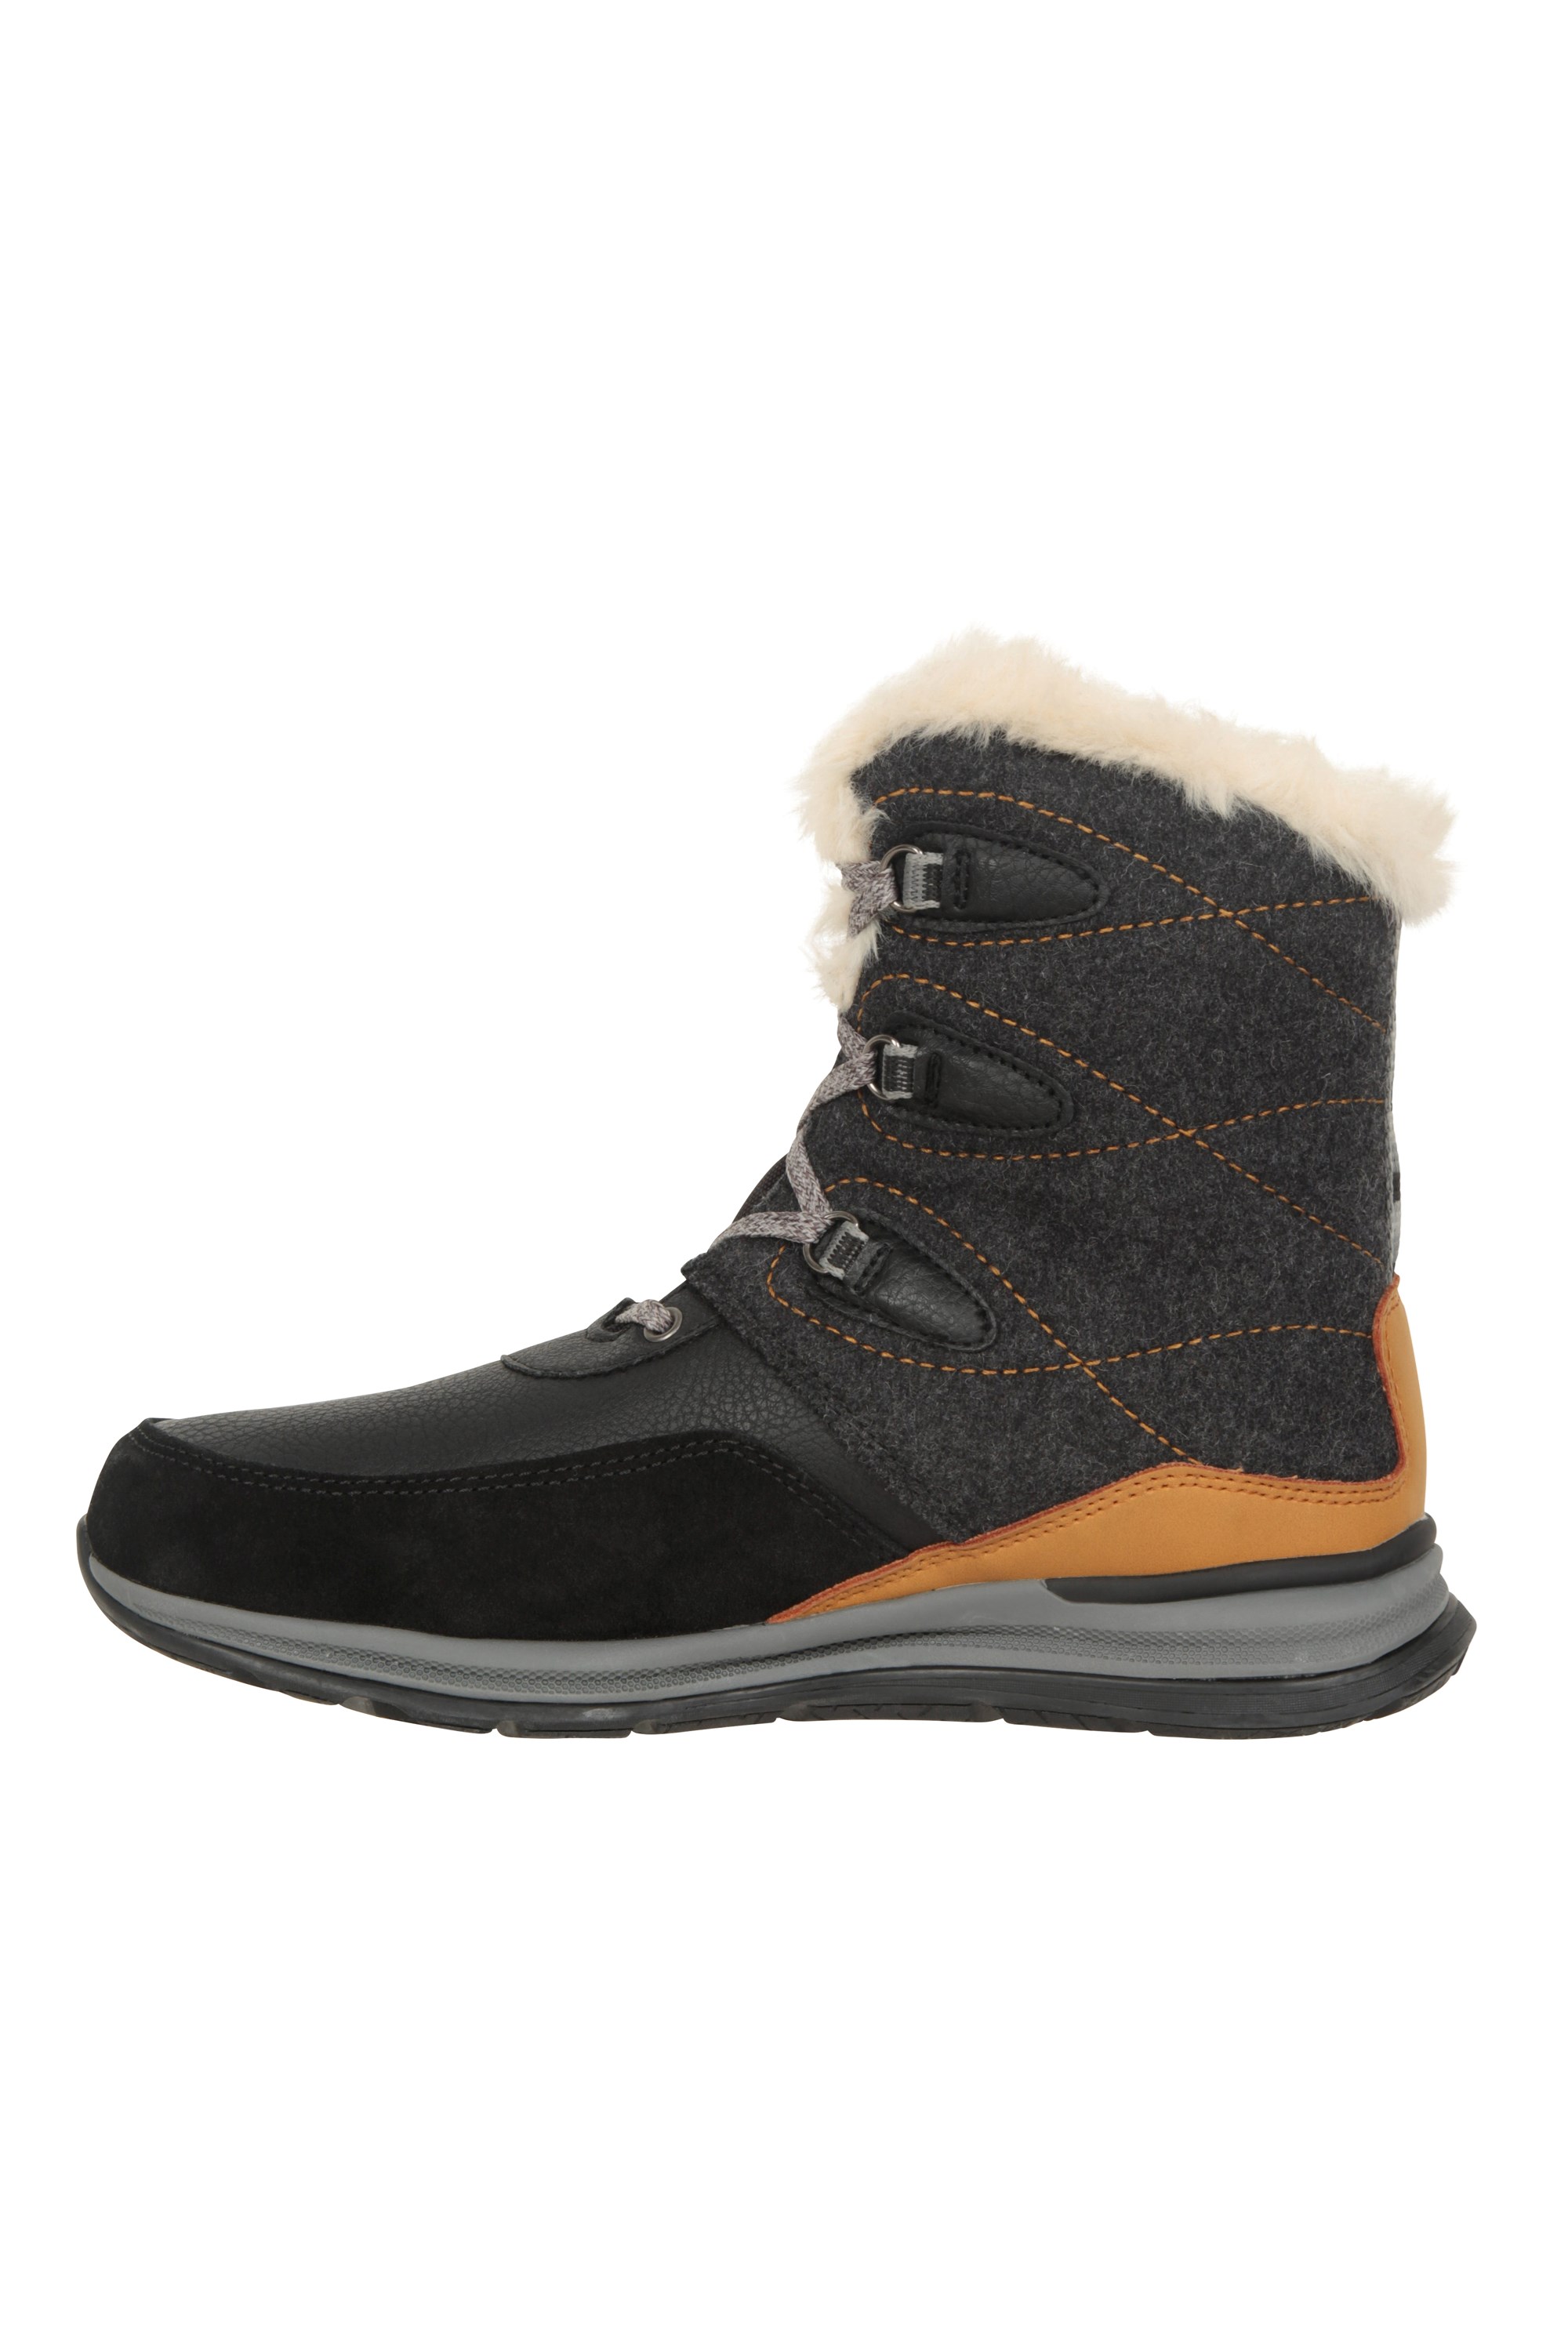 Ice Crystal Womens Waterproof Snow Boots